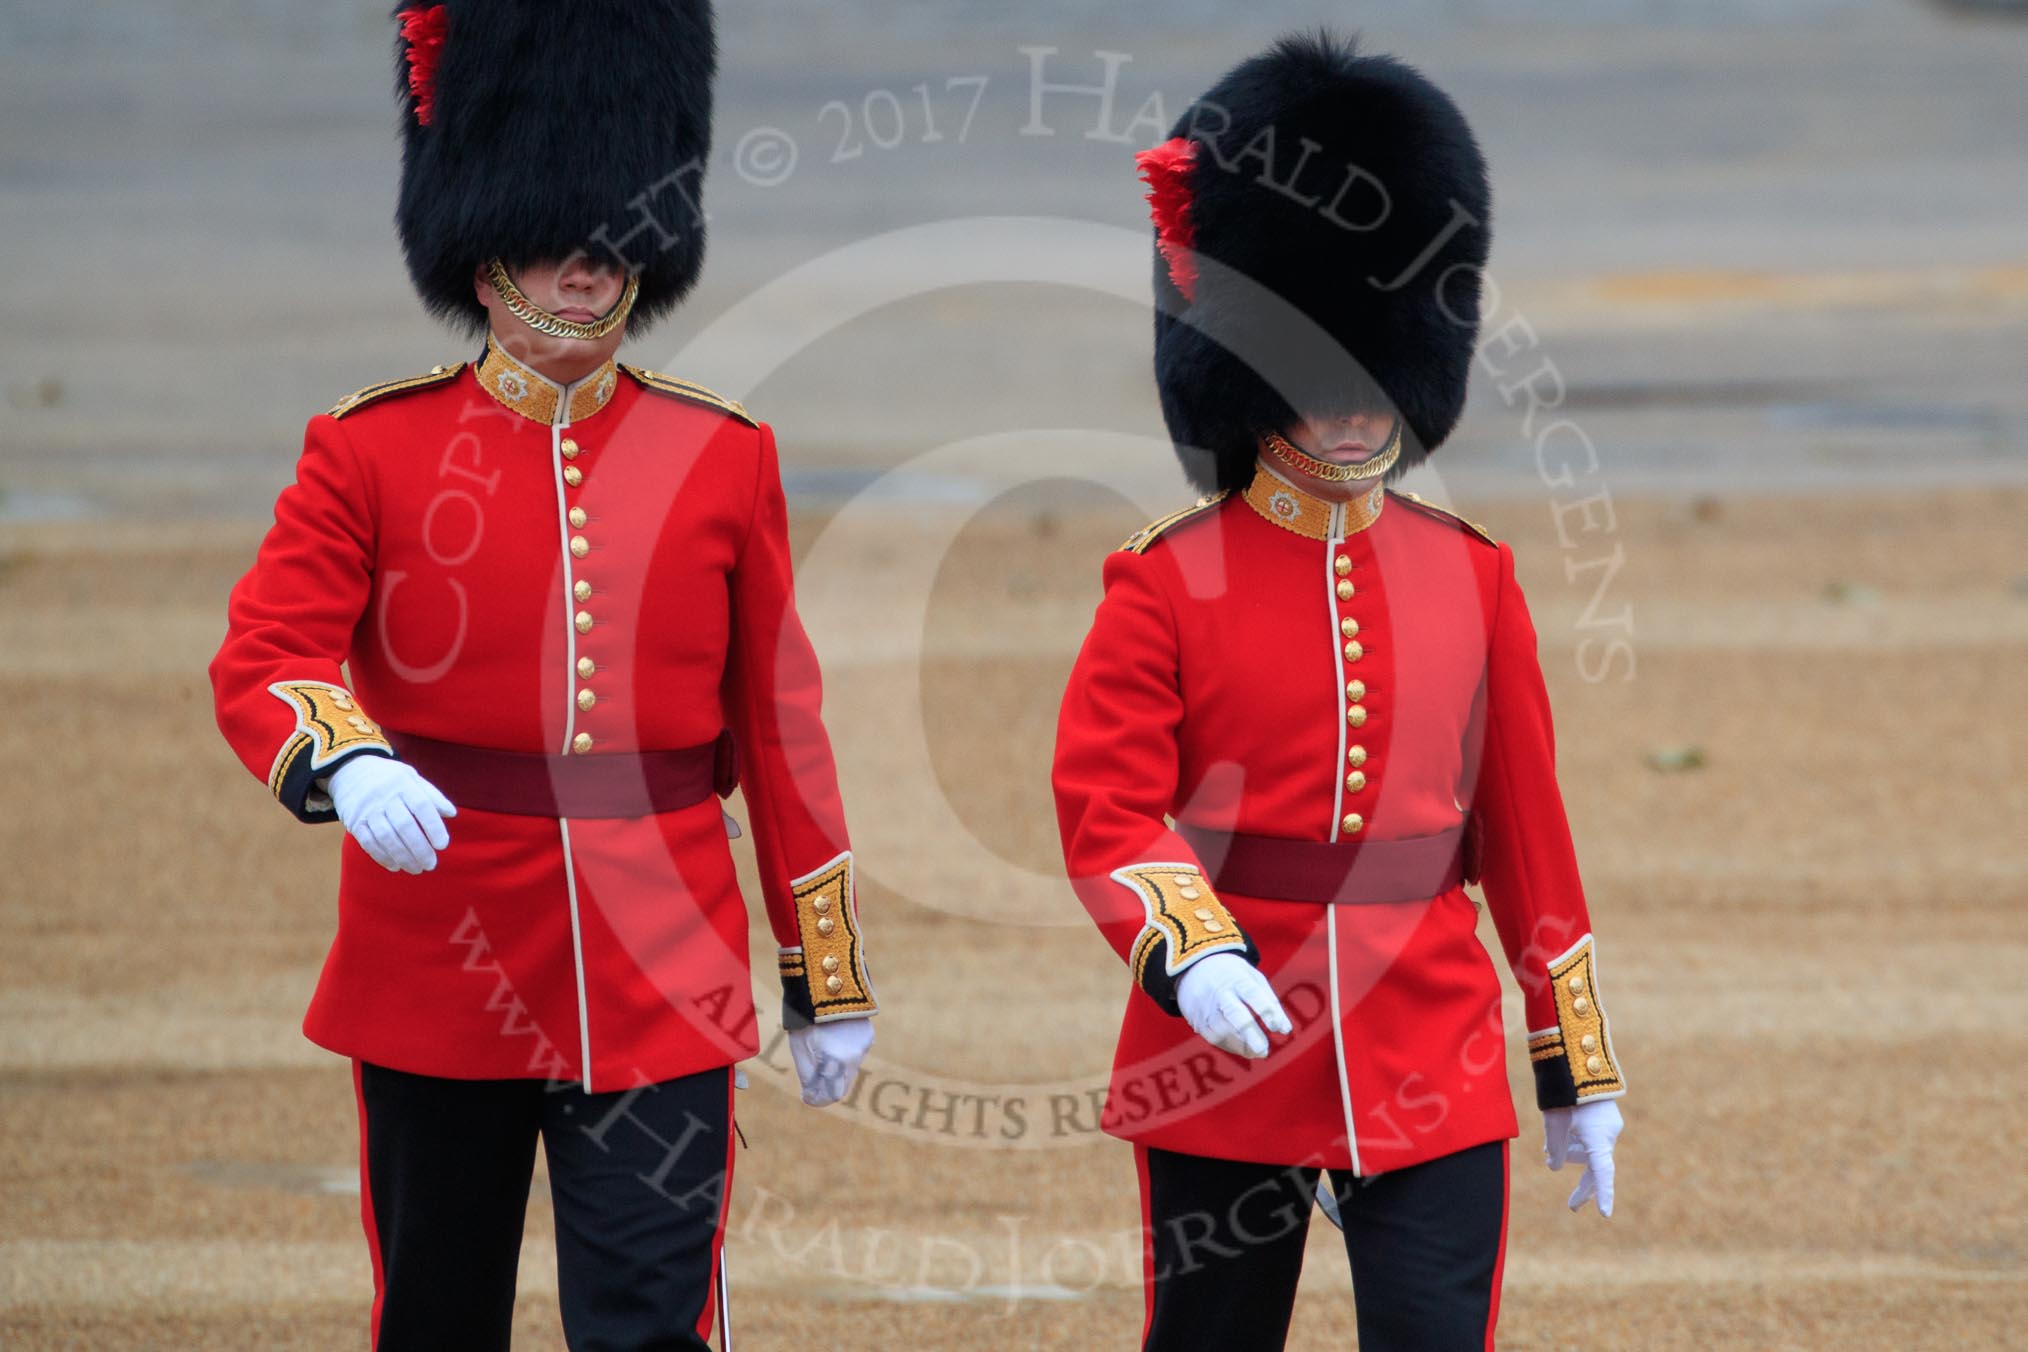 during The Colonel's Review {iptcyear4} (final rehearsal for Trooping the Colour, The Queen's Birthday Parade)  at Horse Guards Parade, Westminster, London, 2 June 2018, 09:54.